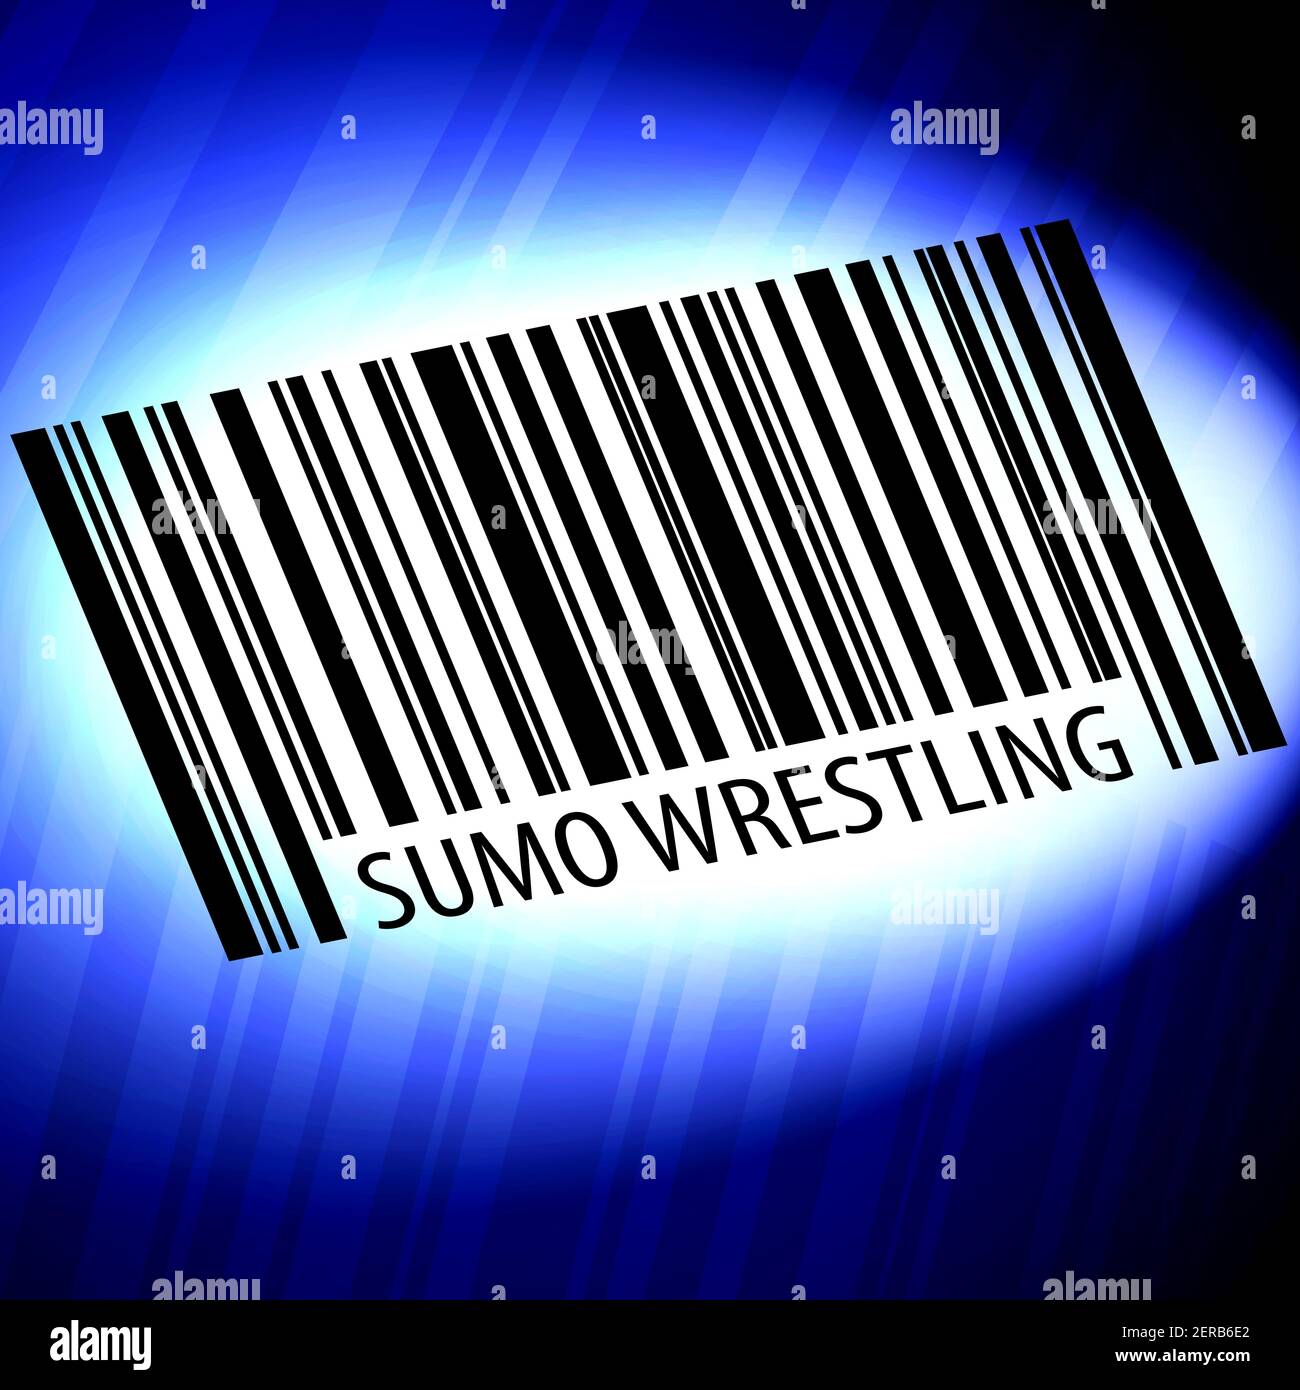 Sumo Wrestling - barcode with futuristic blue background Stock Photo